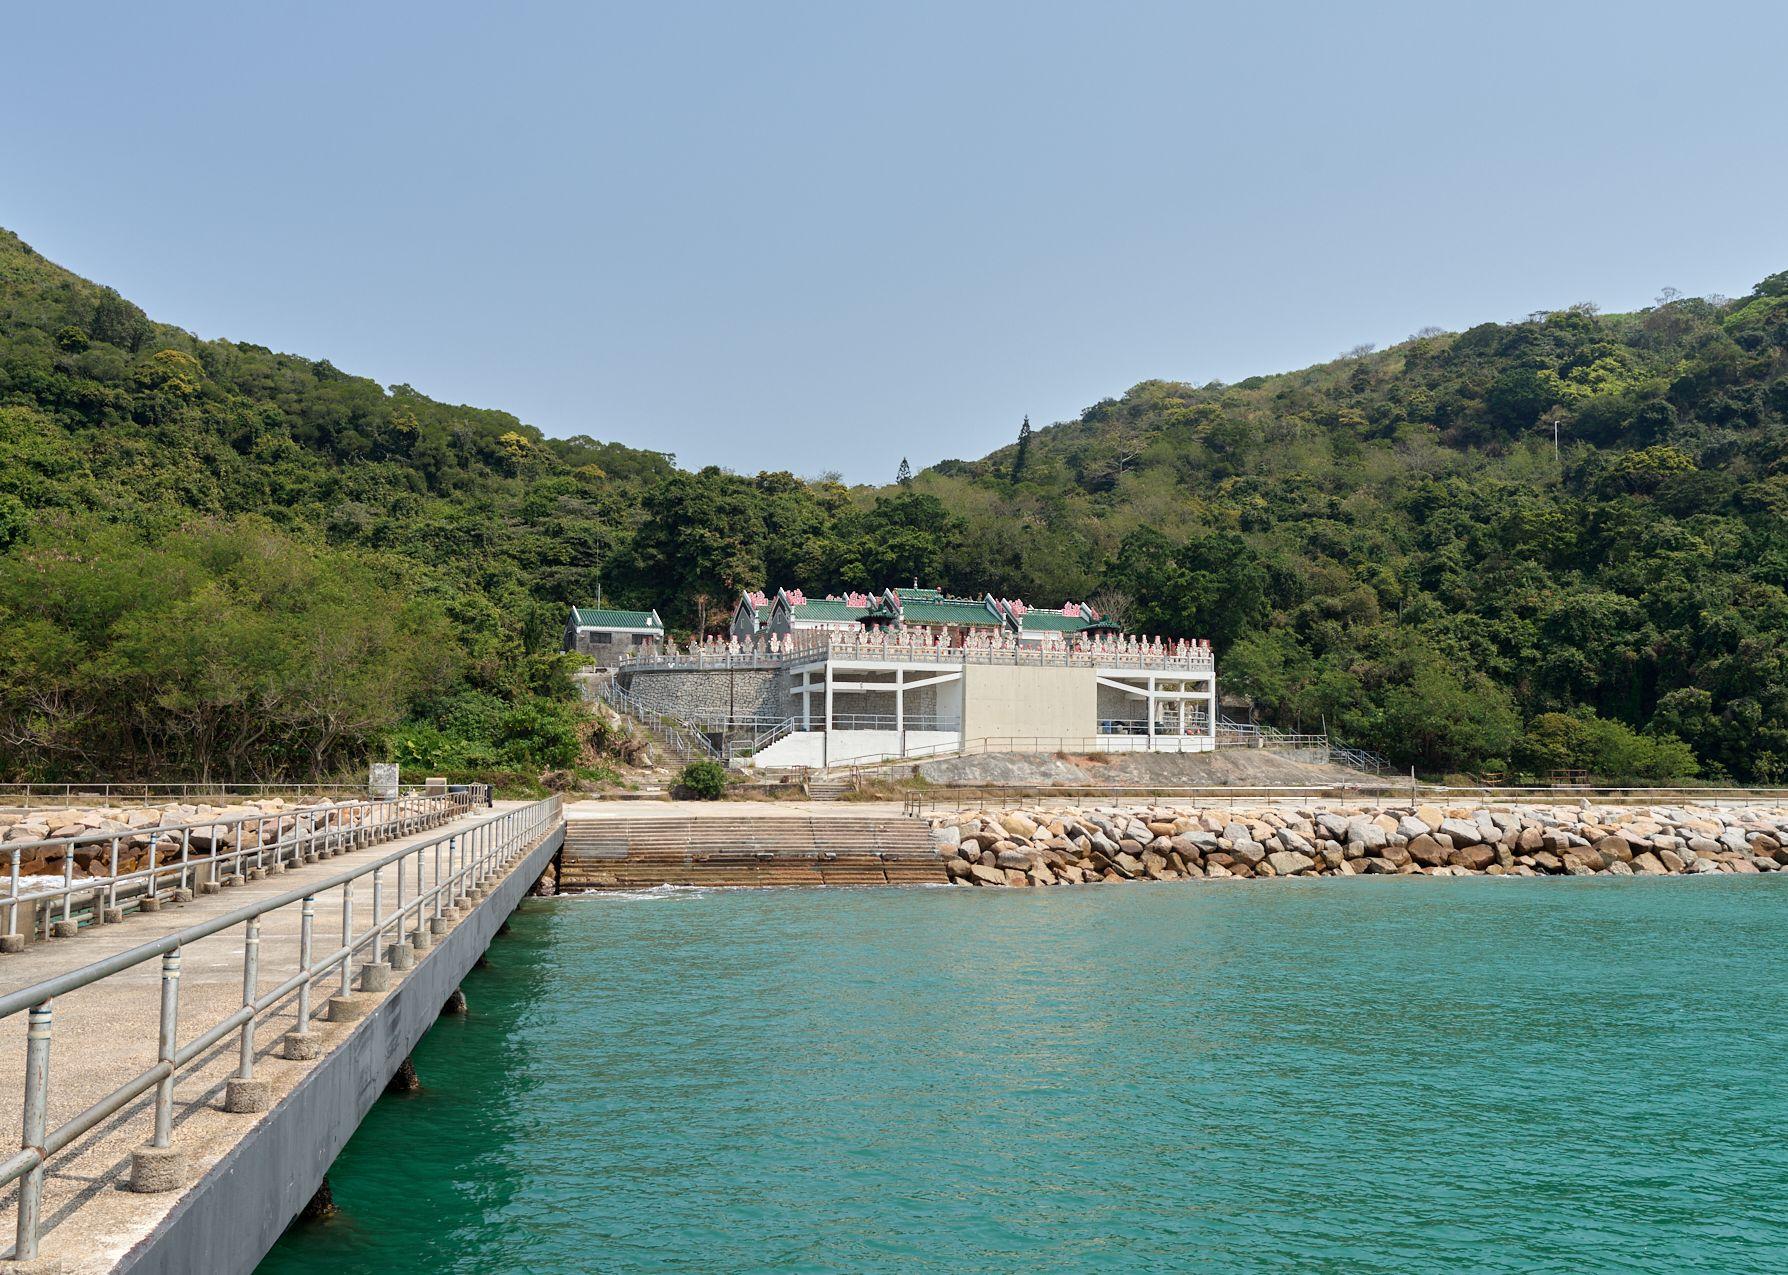 The Government gazetted today (October 20) the declaration of the Tin Hau Temple at Joss House Bay in Sai Kung as a monument under the Antiquities and Monuments Ordinance. Photo shows the sea-facing temple.